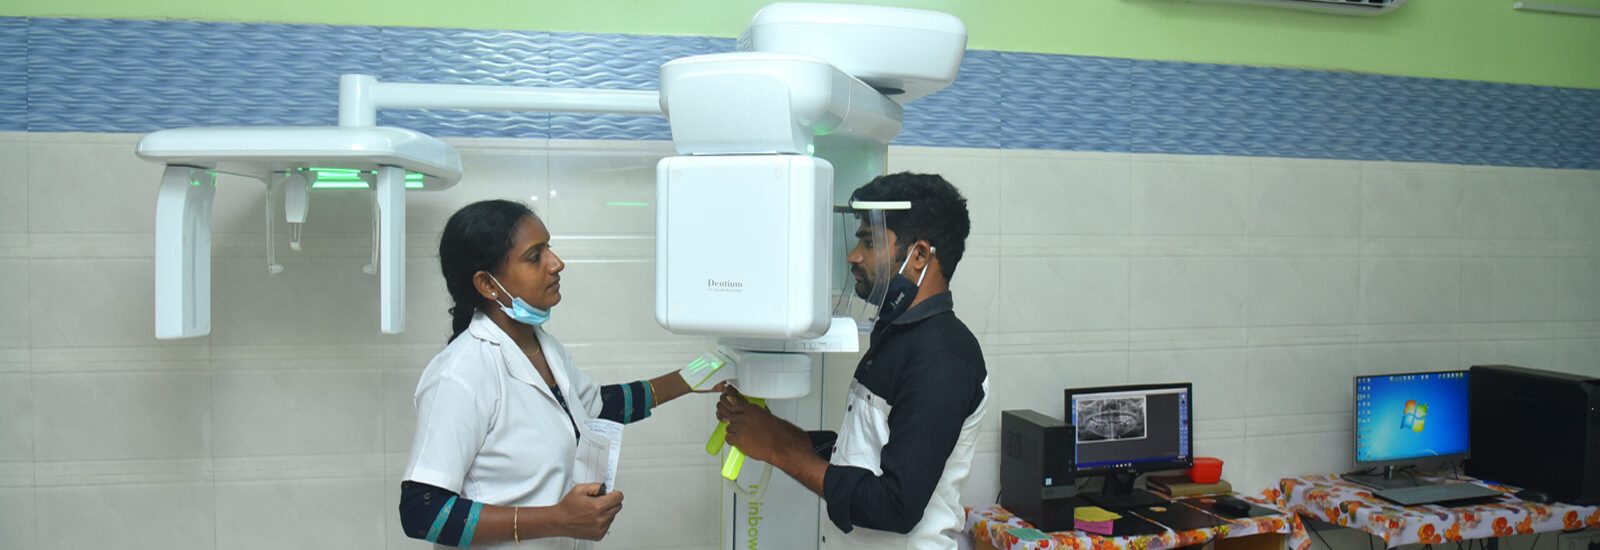 CBCT Machine help to Visualize 3d Images